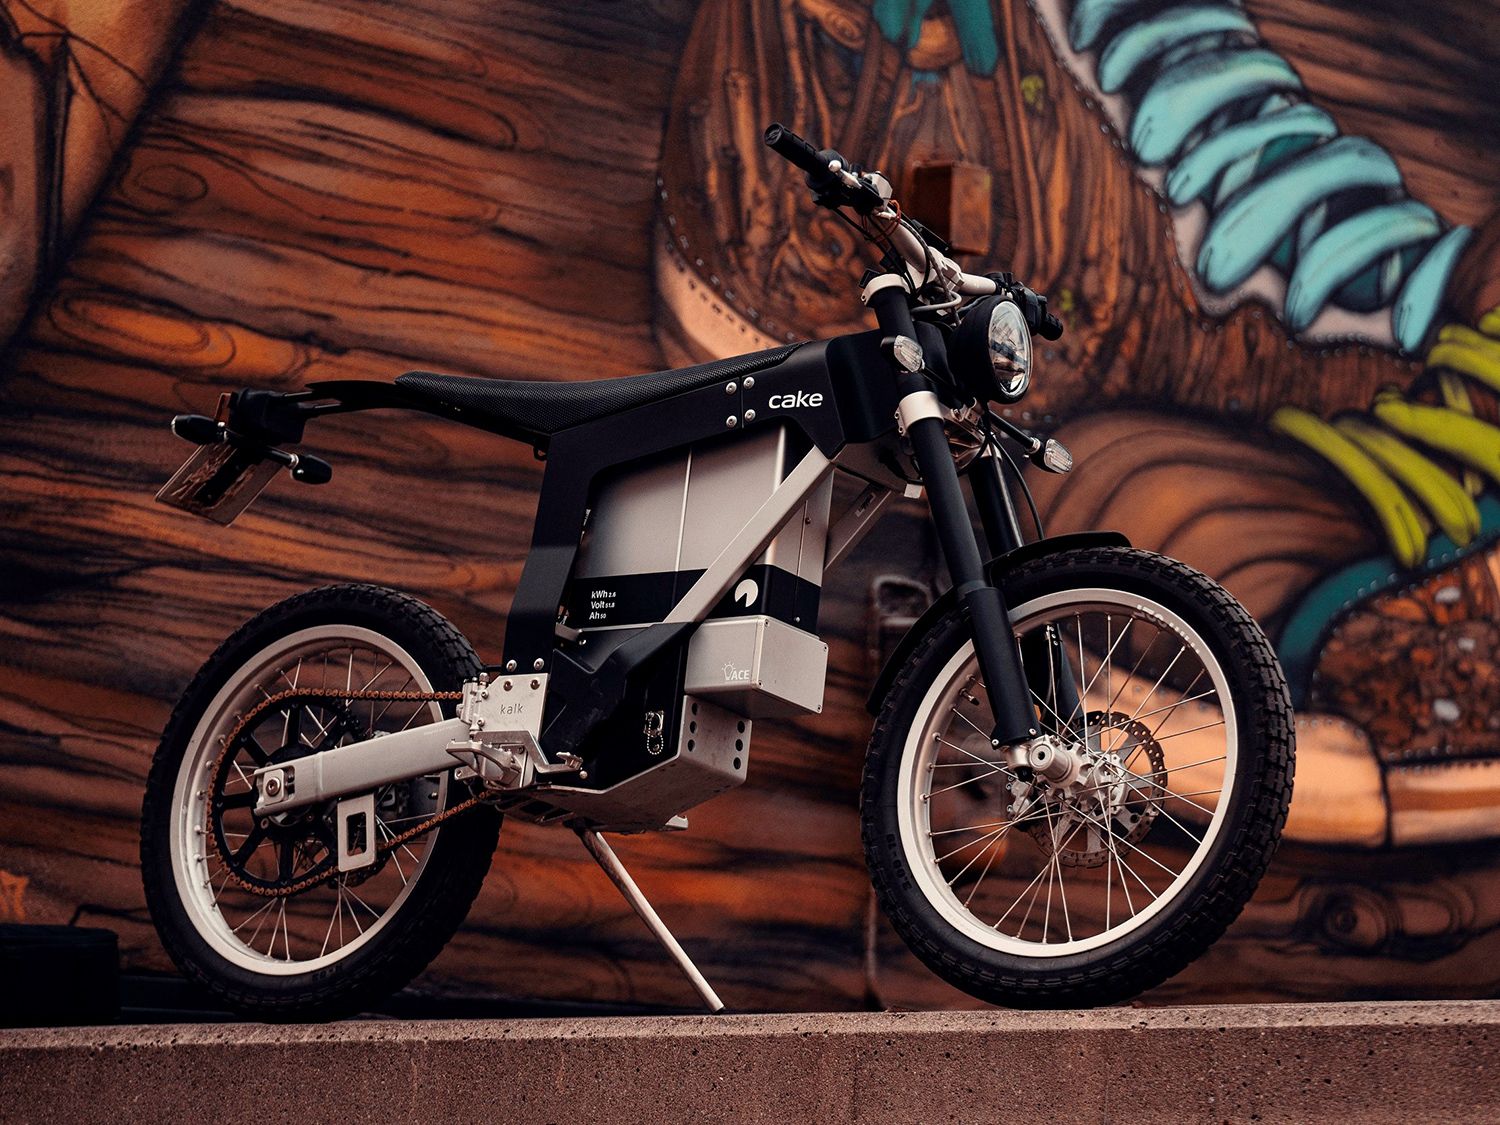 A Cake Kalk INK electric motorcycle sits on a ledge.